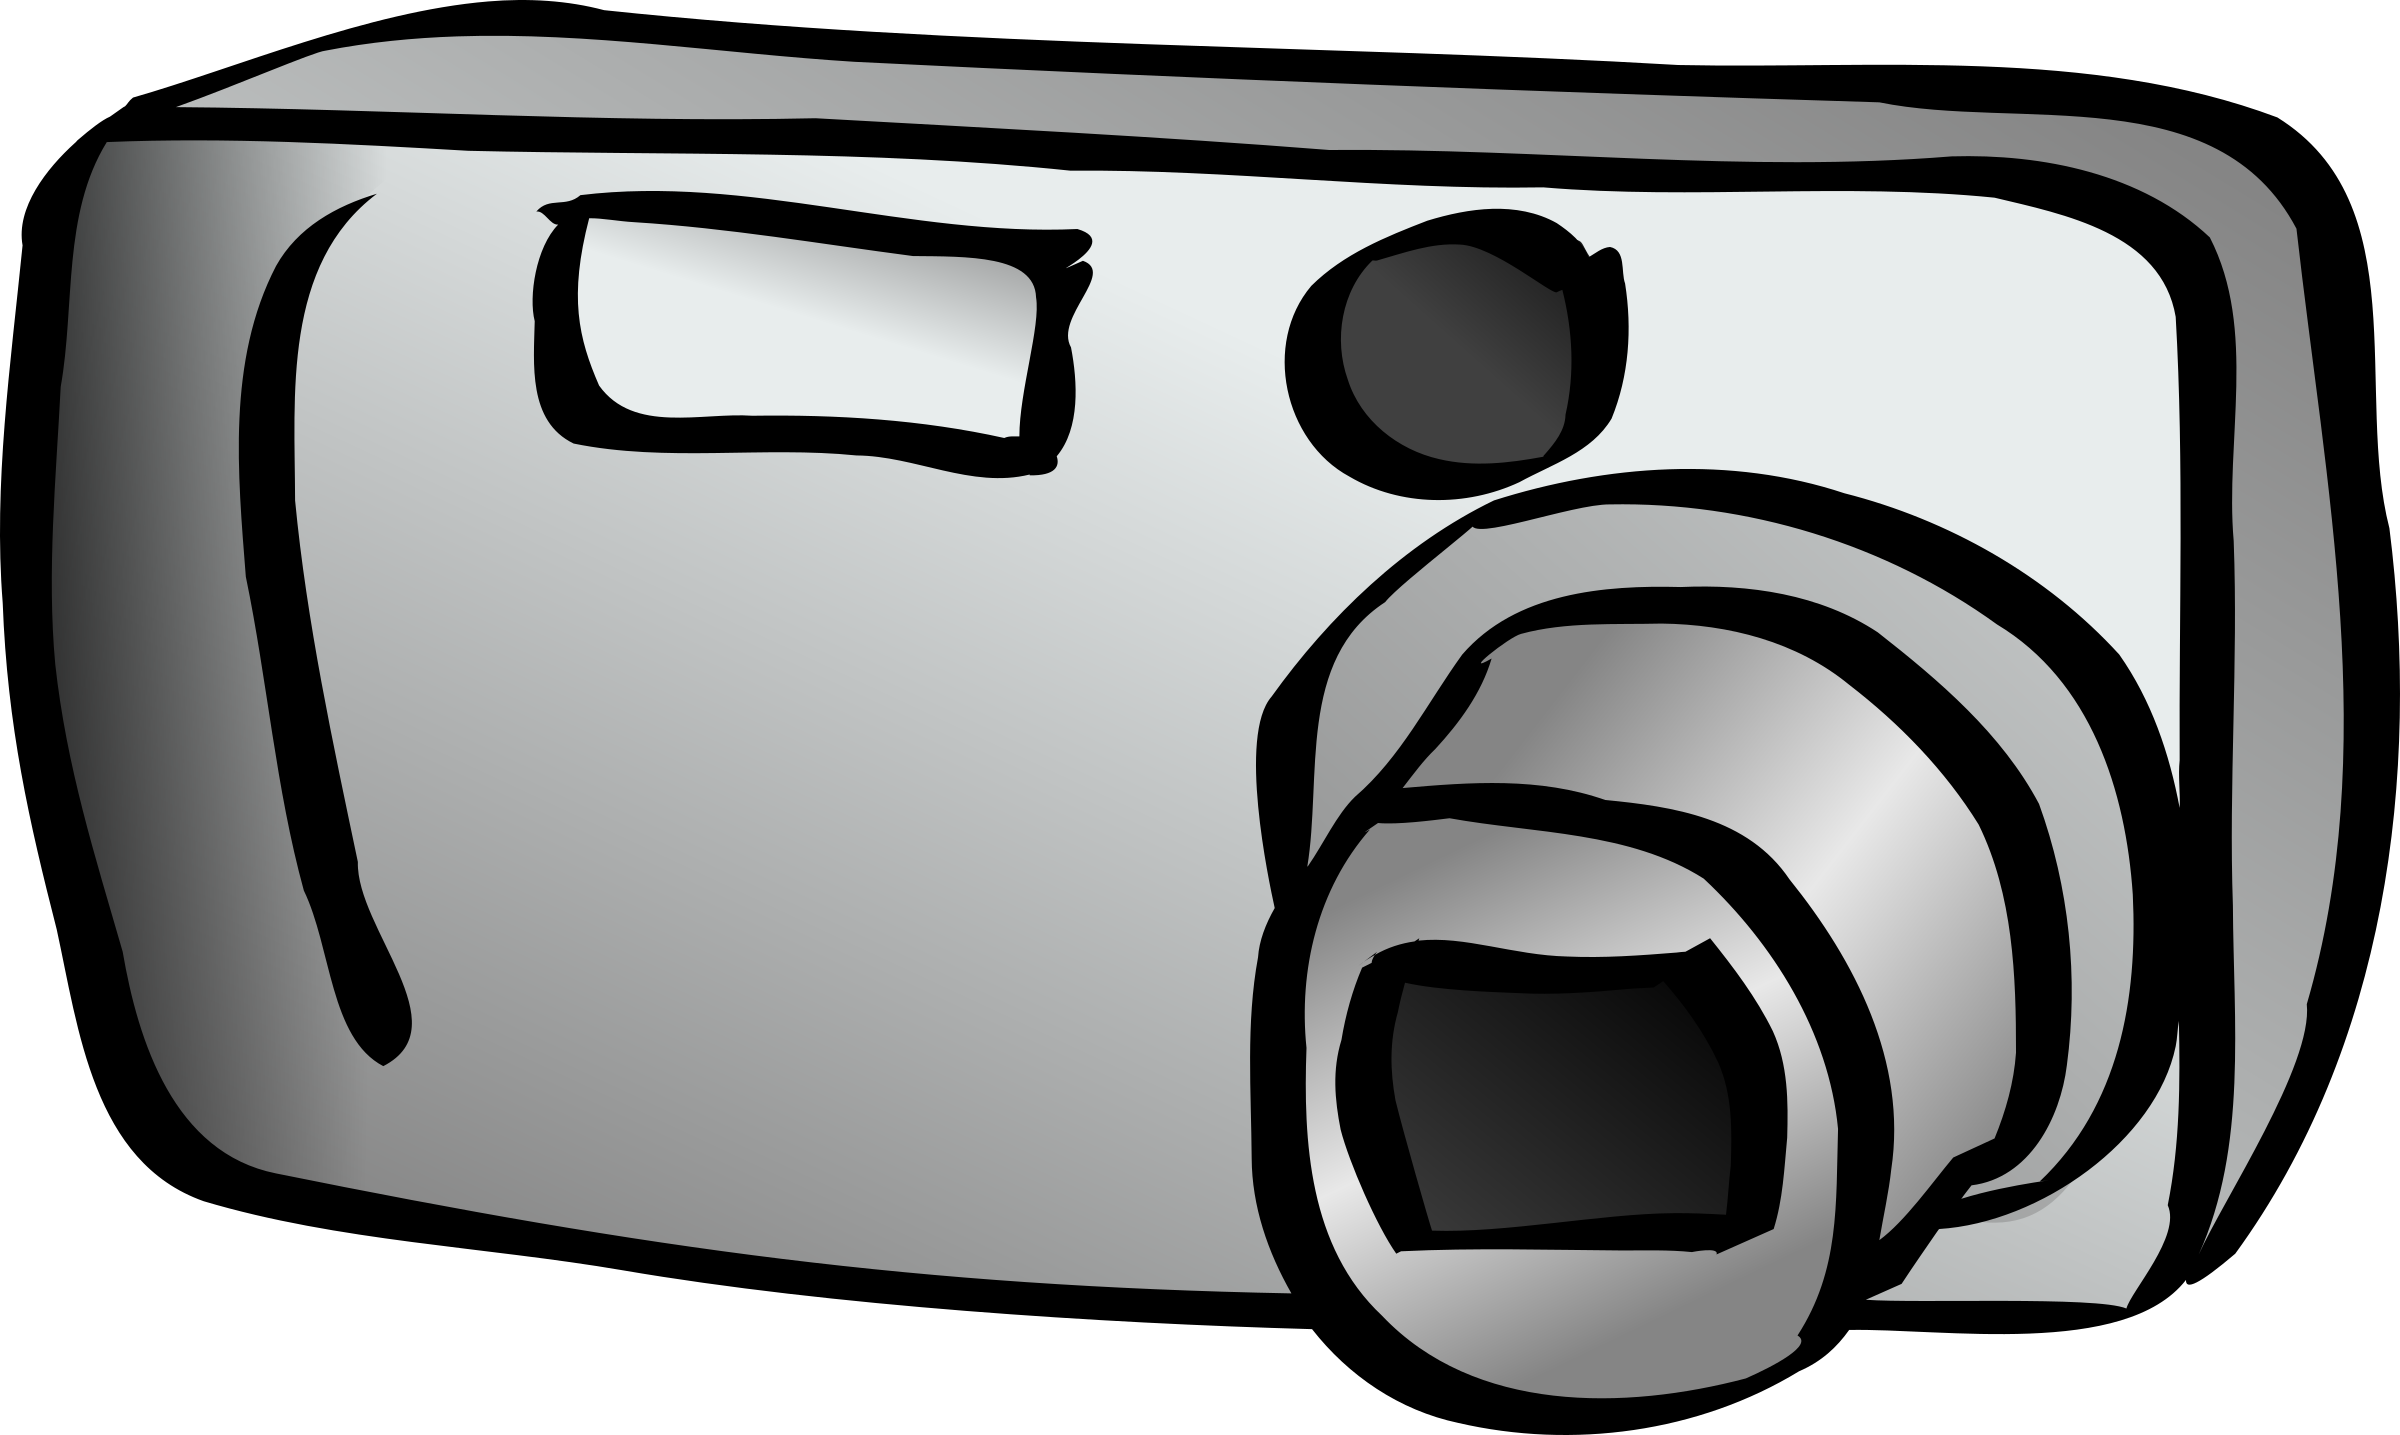 Digital compact icons png. Clipart camera animated